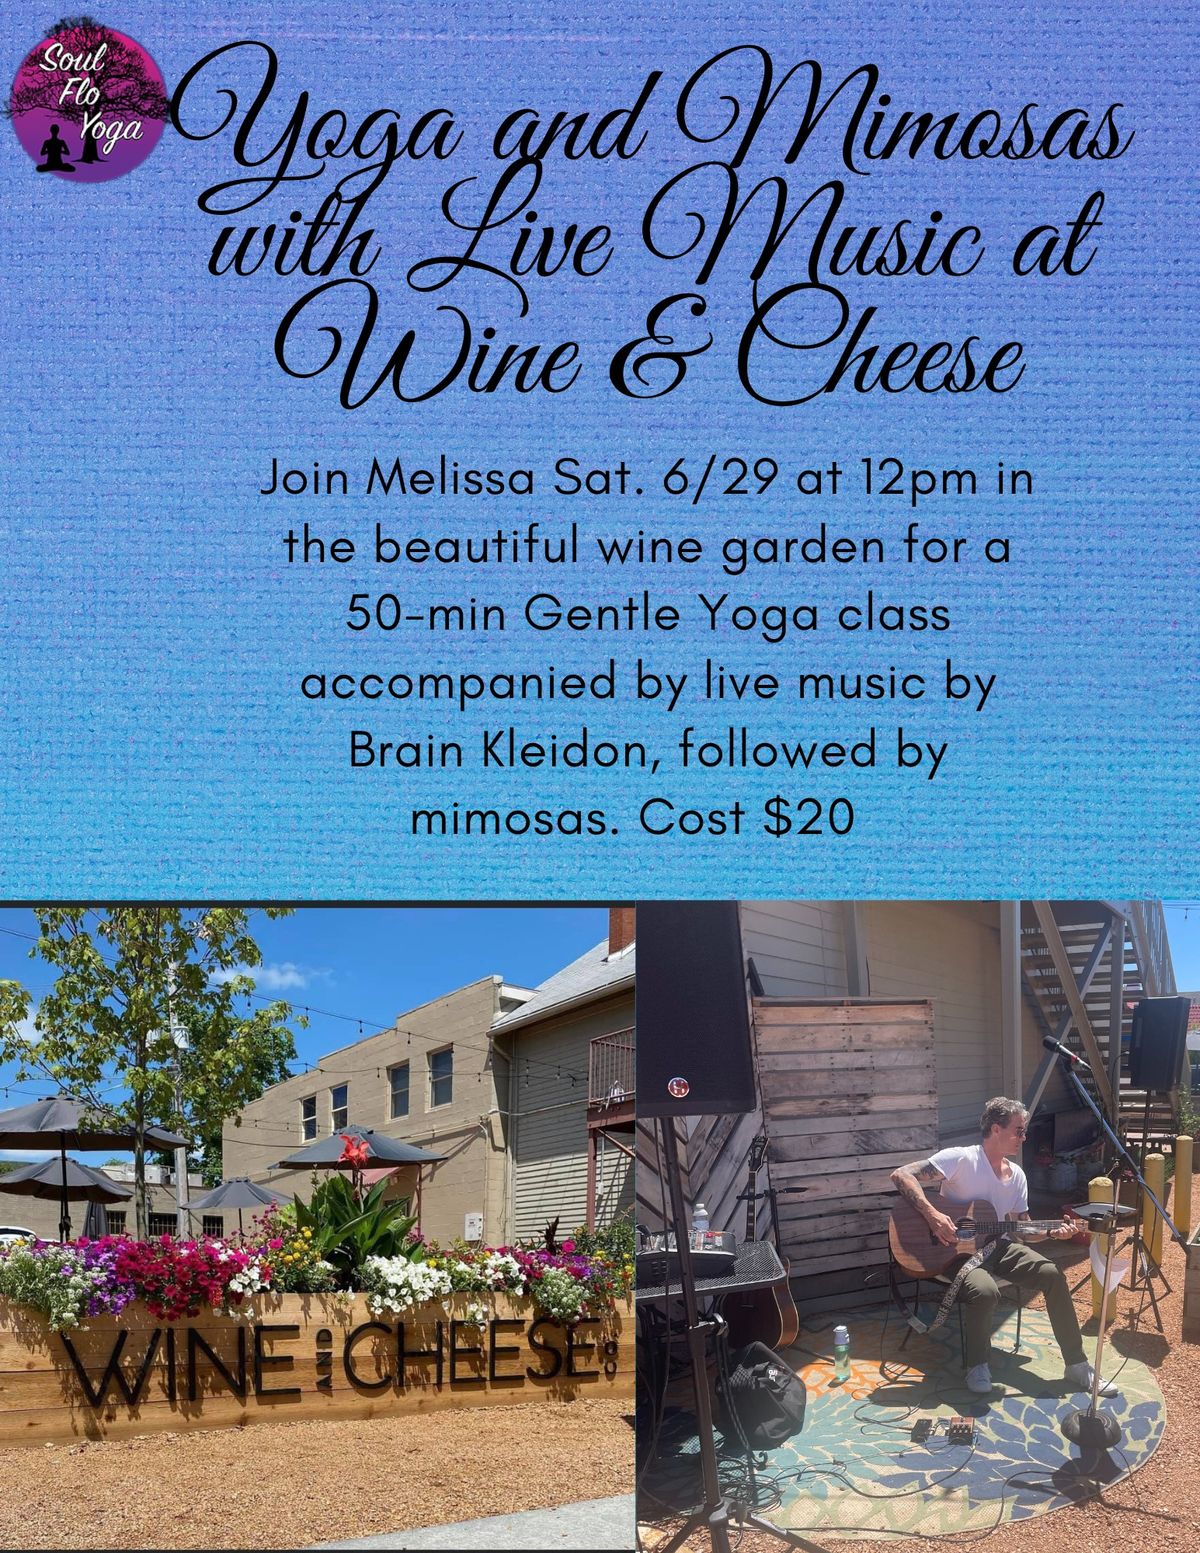 Yoga & Mimosas with Live Music at Wine & Cheese